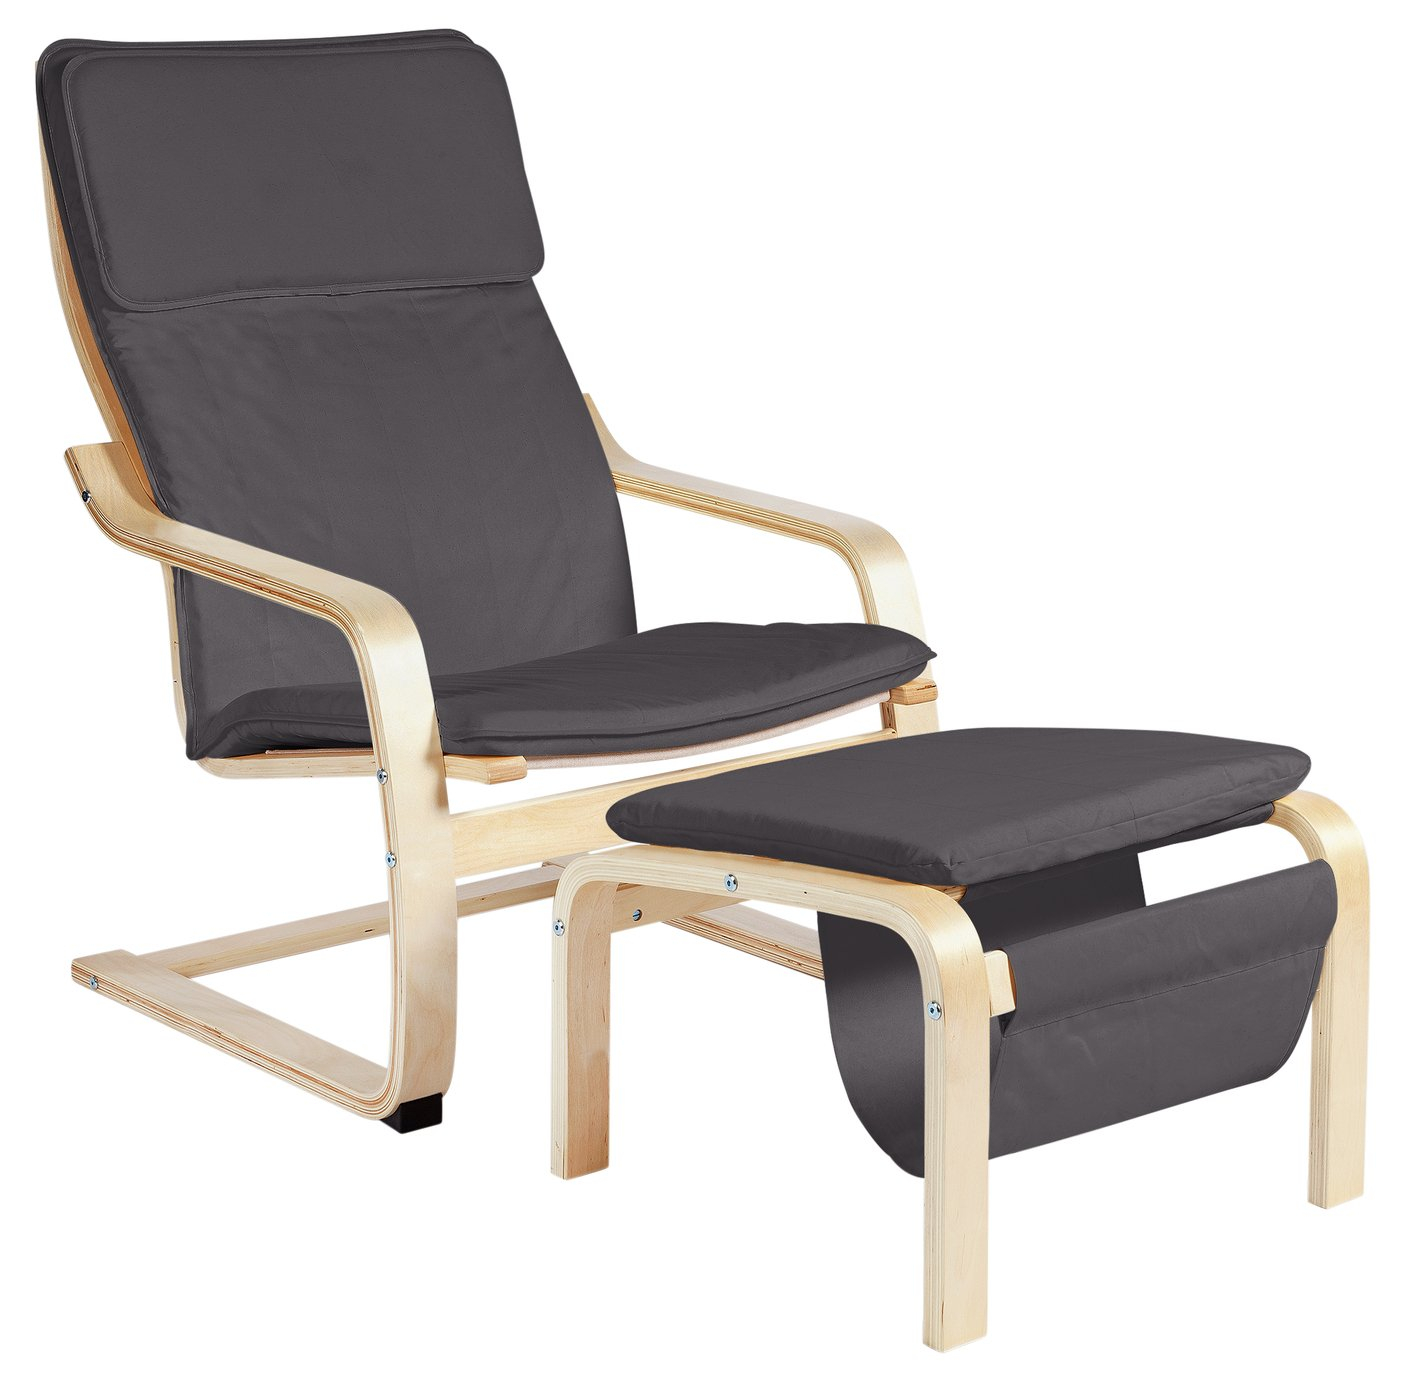 Habitat Bentwood High Back Chair & Footstool (2 Colours) now £67, Click